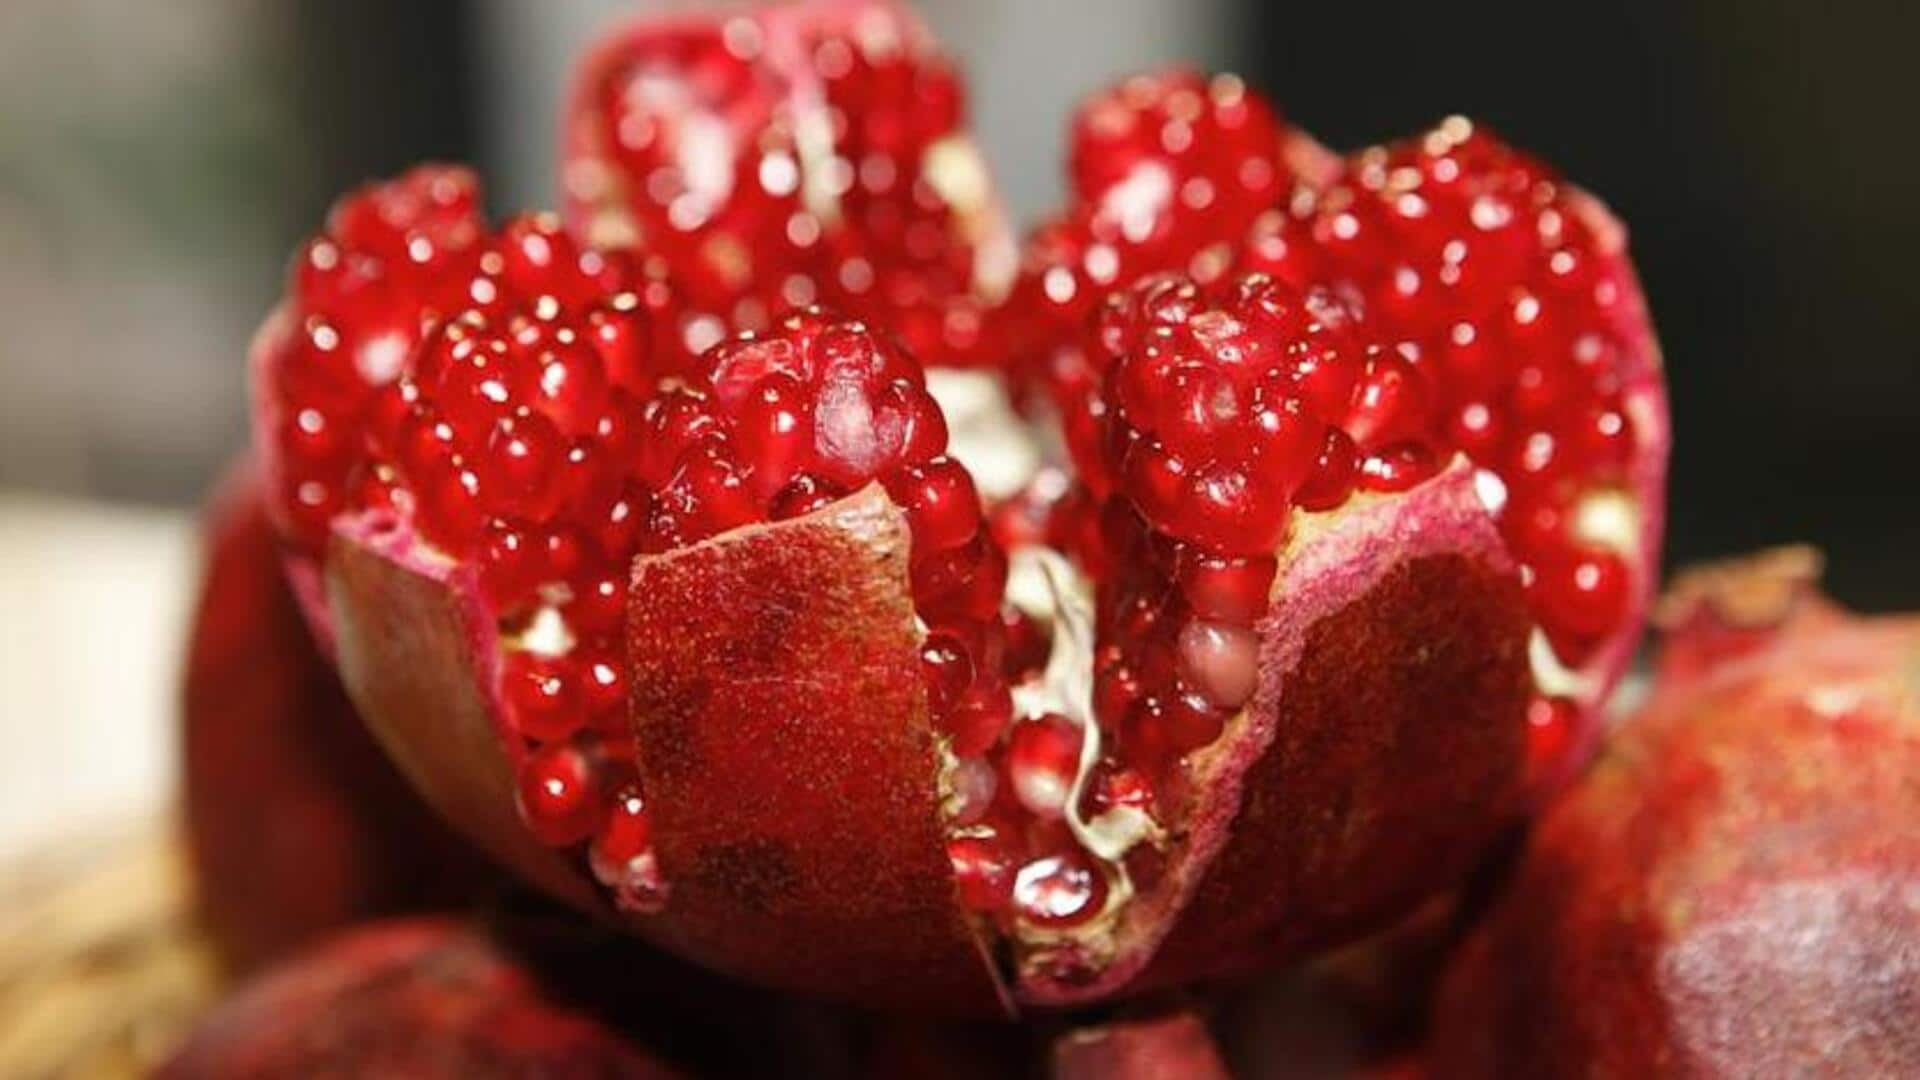 Try these pomegranate-based masks for glowing skin